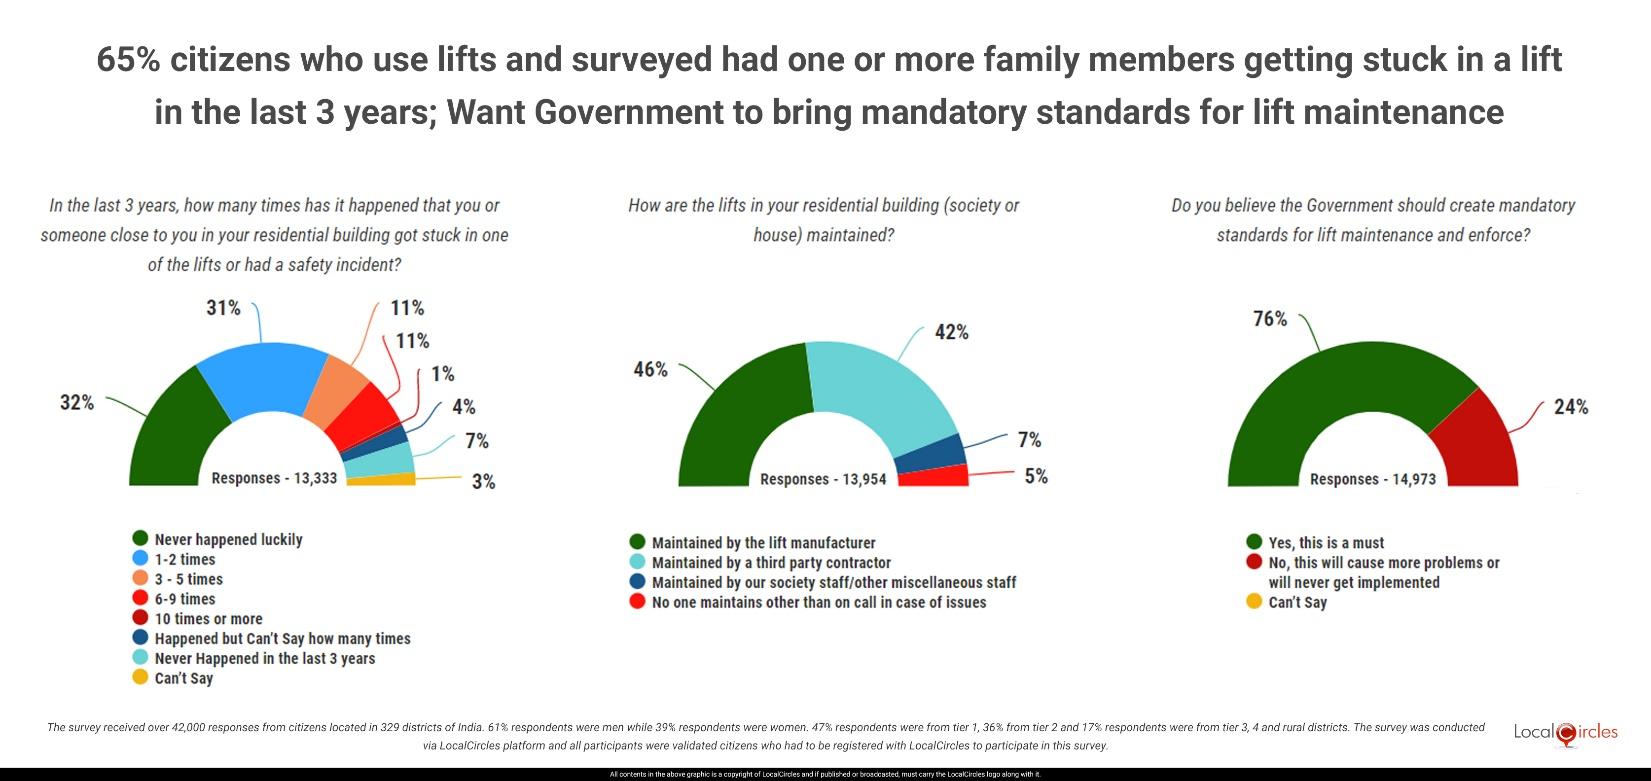 58% citizens who use lifts and surveyed have had one or more family members getting stuck in a lift in last 3 years; 76% want government to bring mandatory standards for lift maintenance